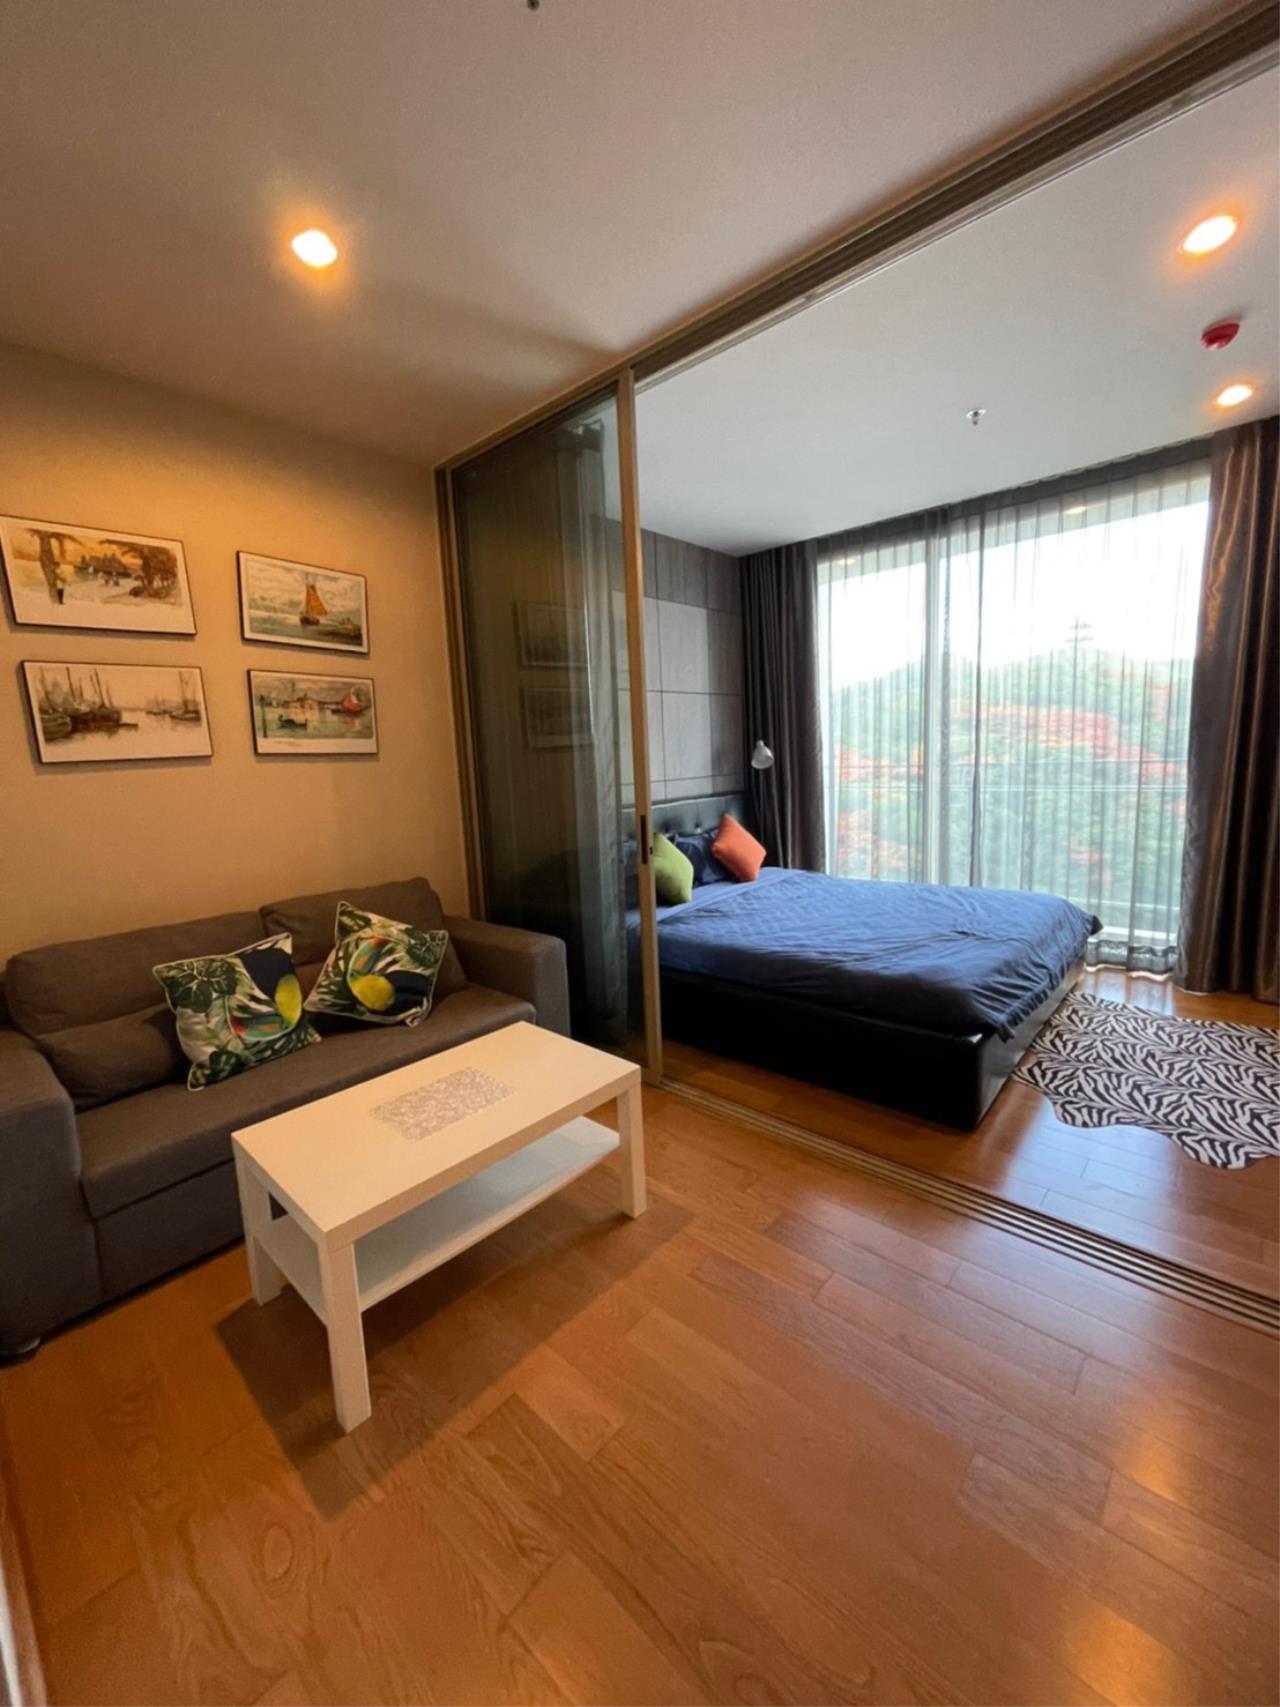 Blue Gold Property Agency's Marina bayfront Sri Racha Condominium Work From Home Promotion 9,900฿ 5